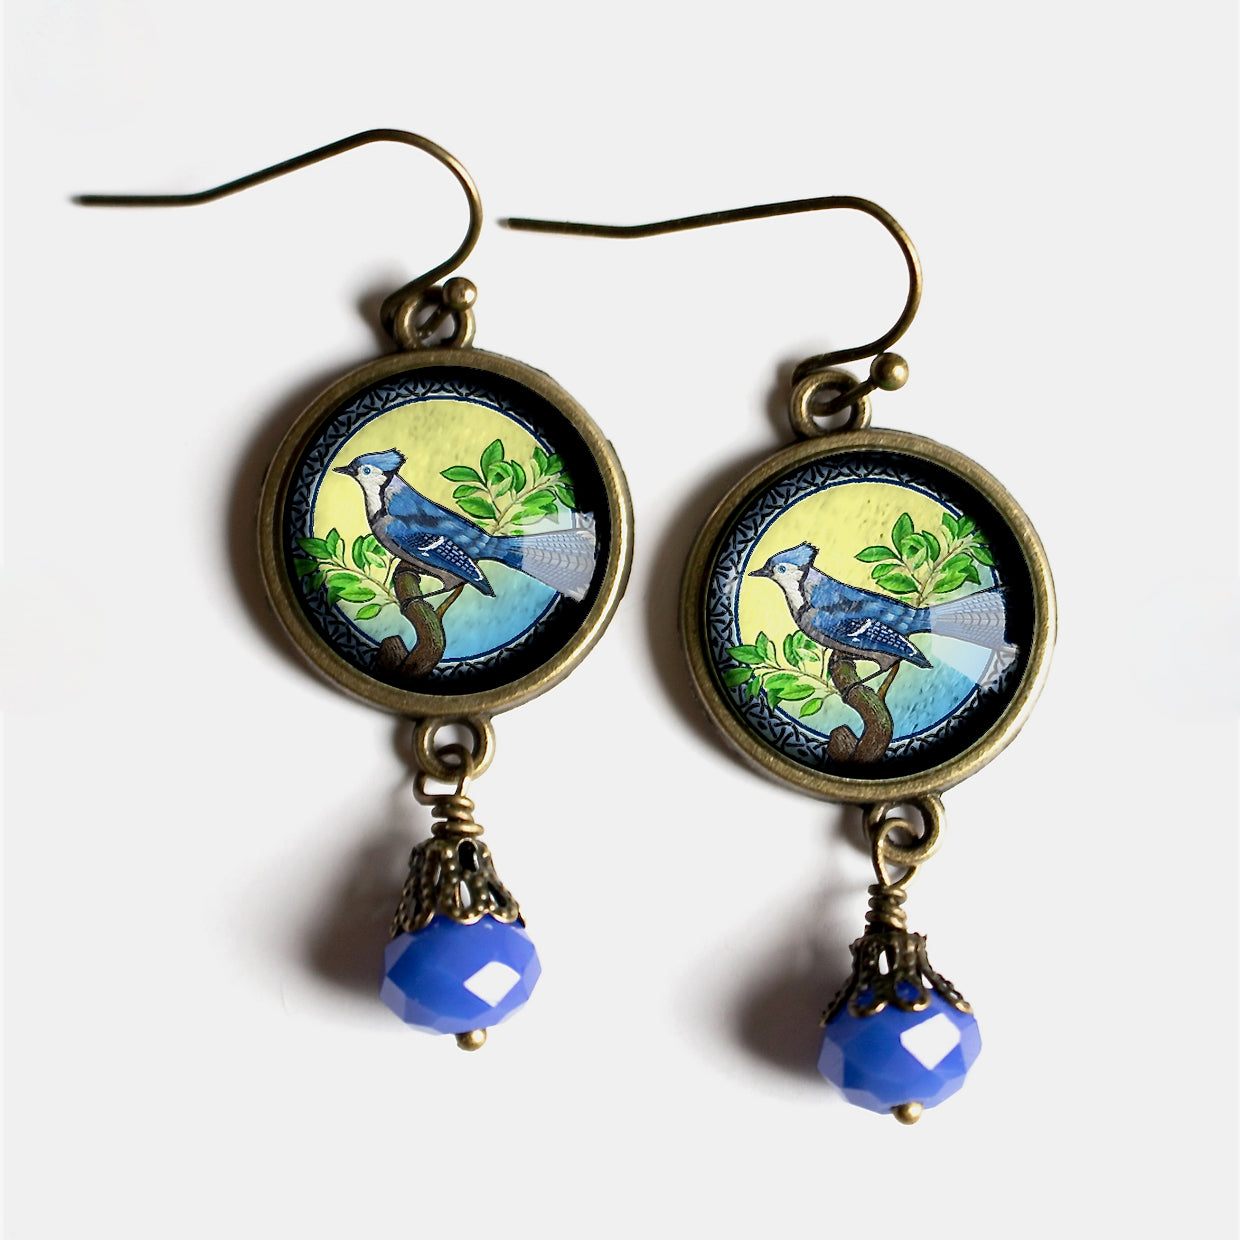 Vintage-Style Cottage Core Blue Jay Earrings Divine Iguana Made in the USA - A